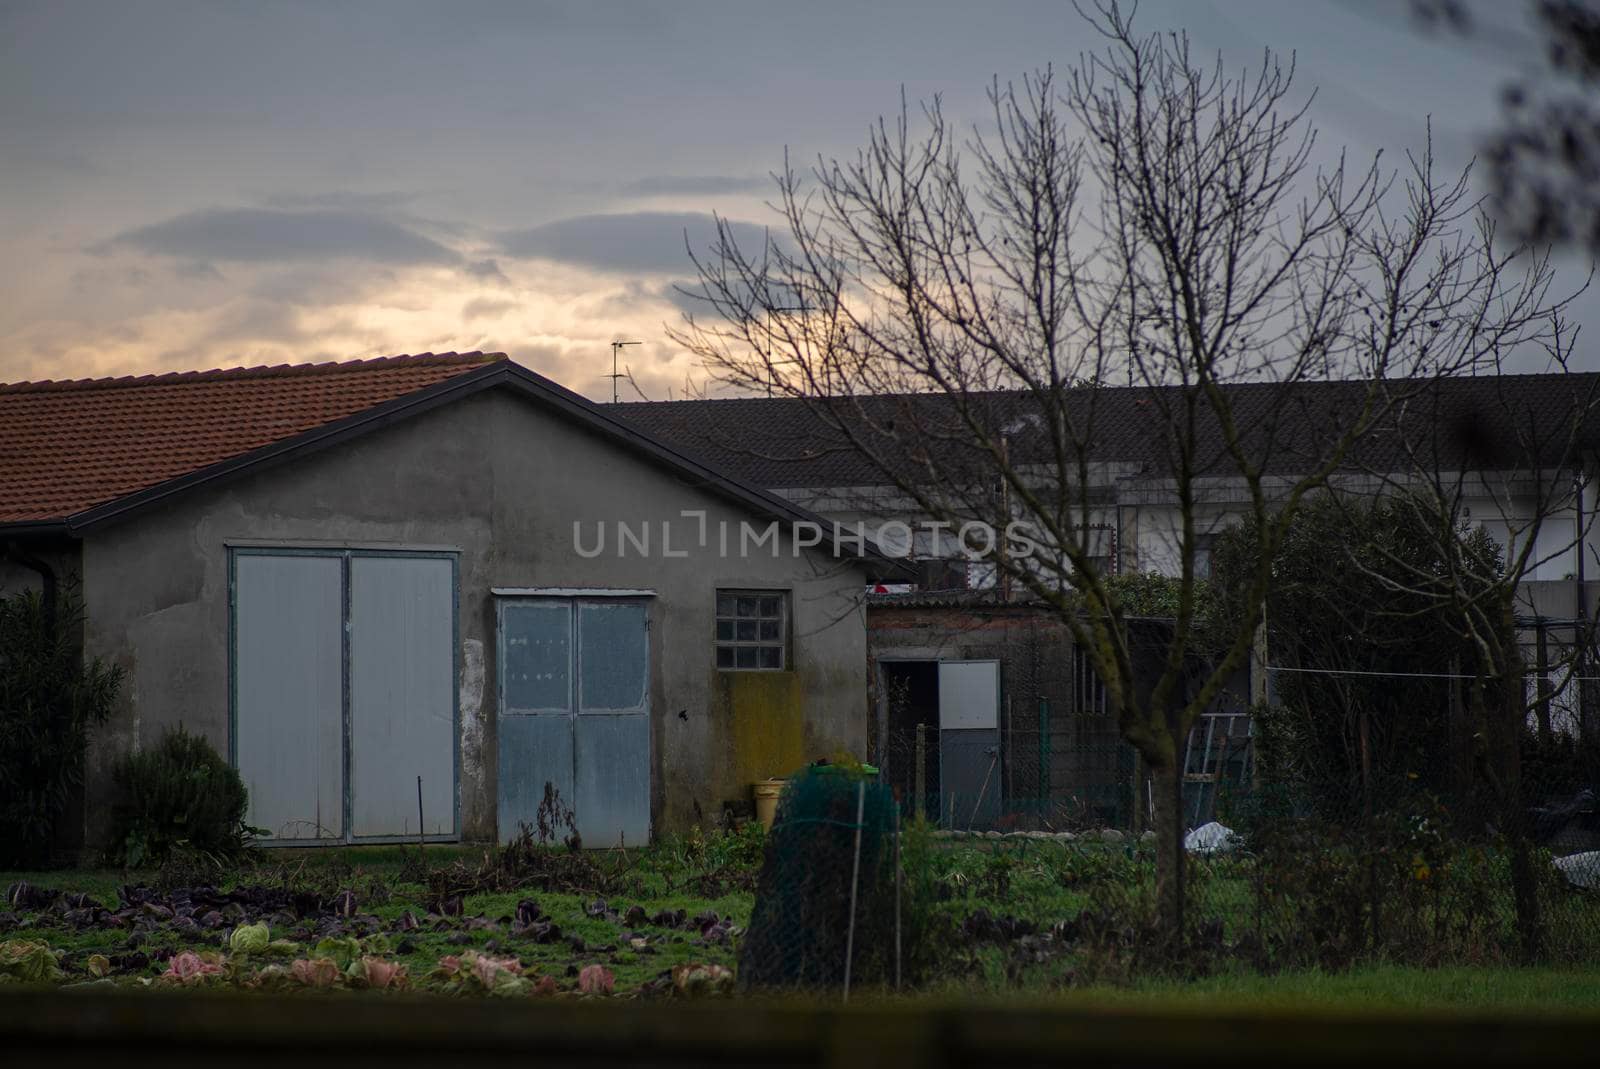 Poor country house immersed in the crops of northern Italy